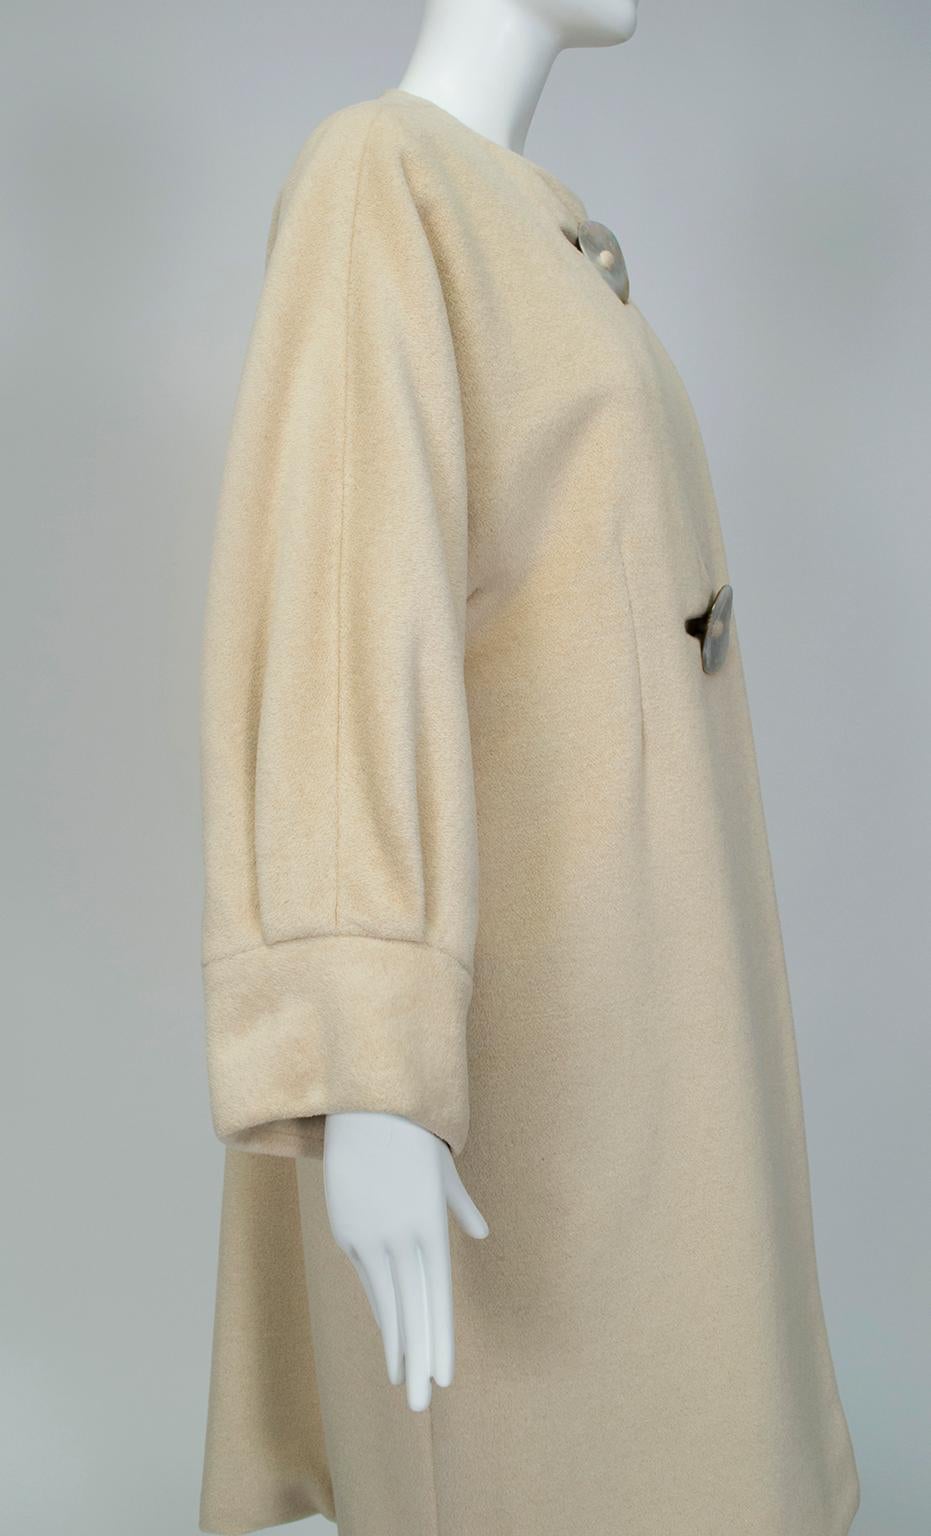 Women's Bud Kilpatrick Cashmere Coat with Nacre Buttons, 1950s